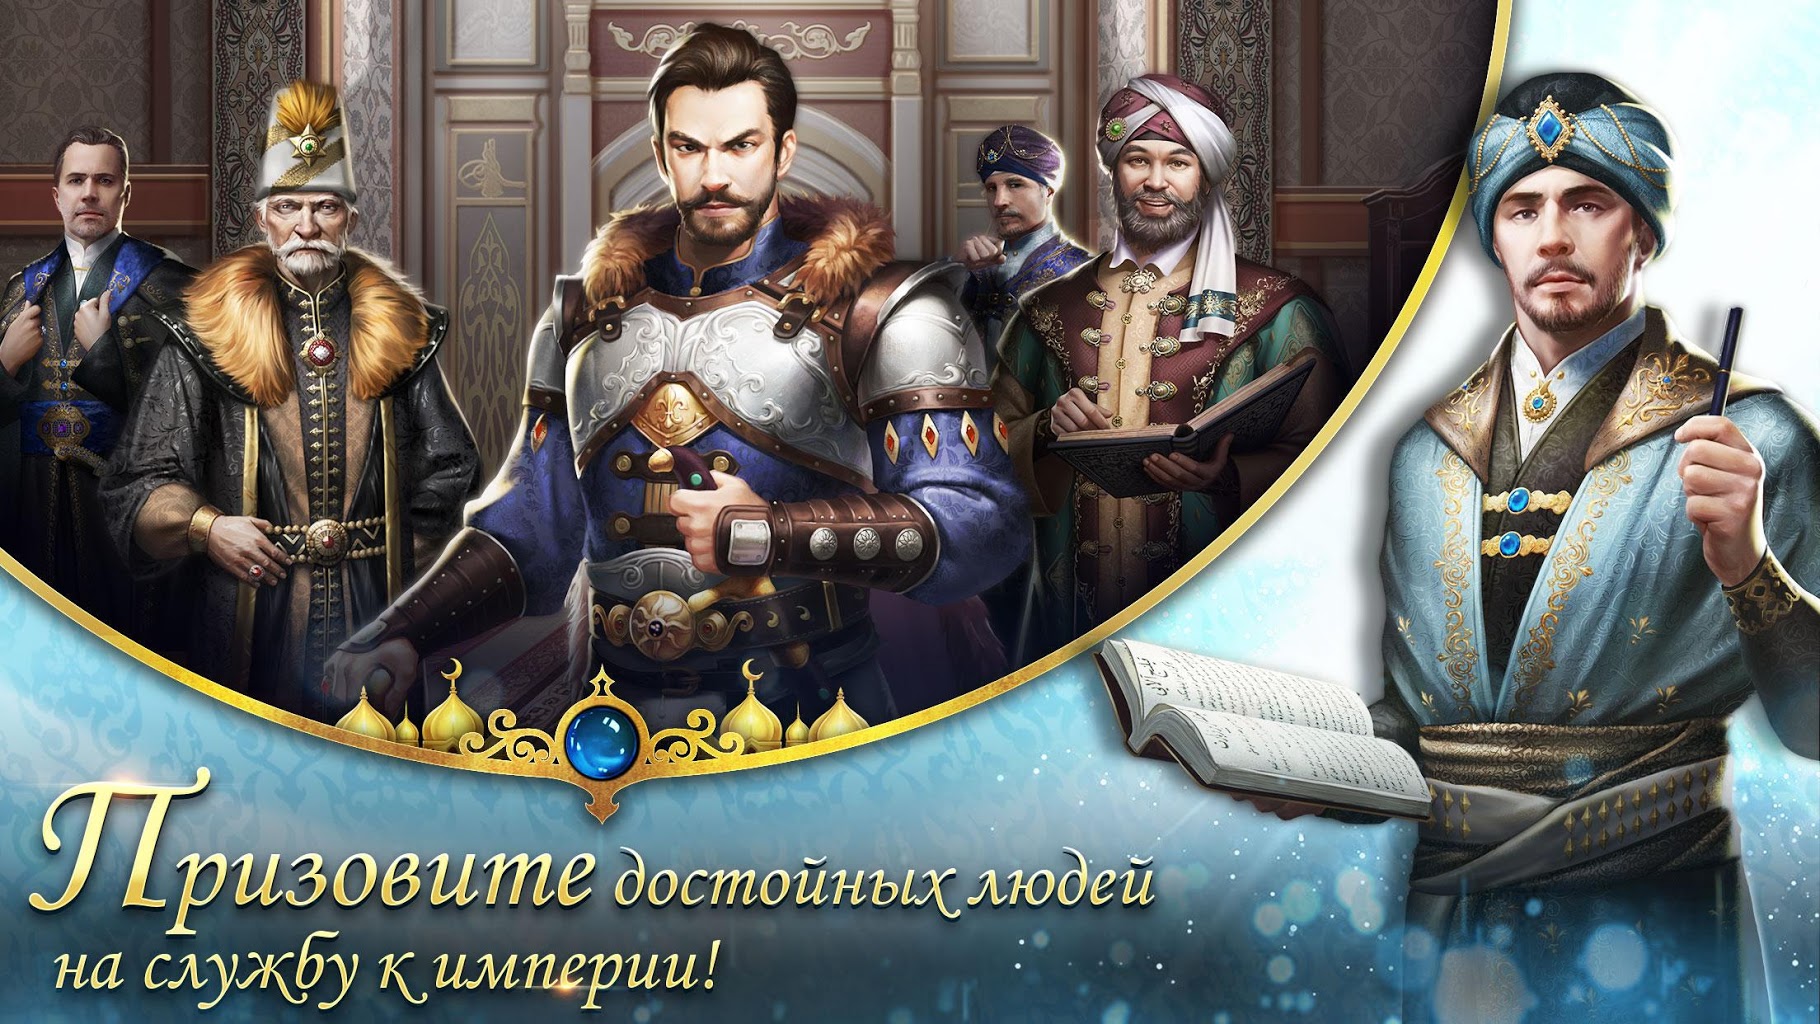 Download Game of Sultans 2.9.03 APK for android